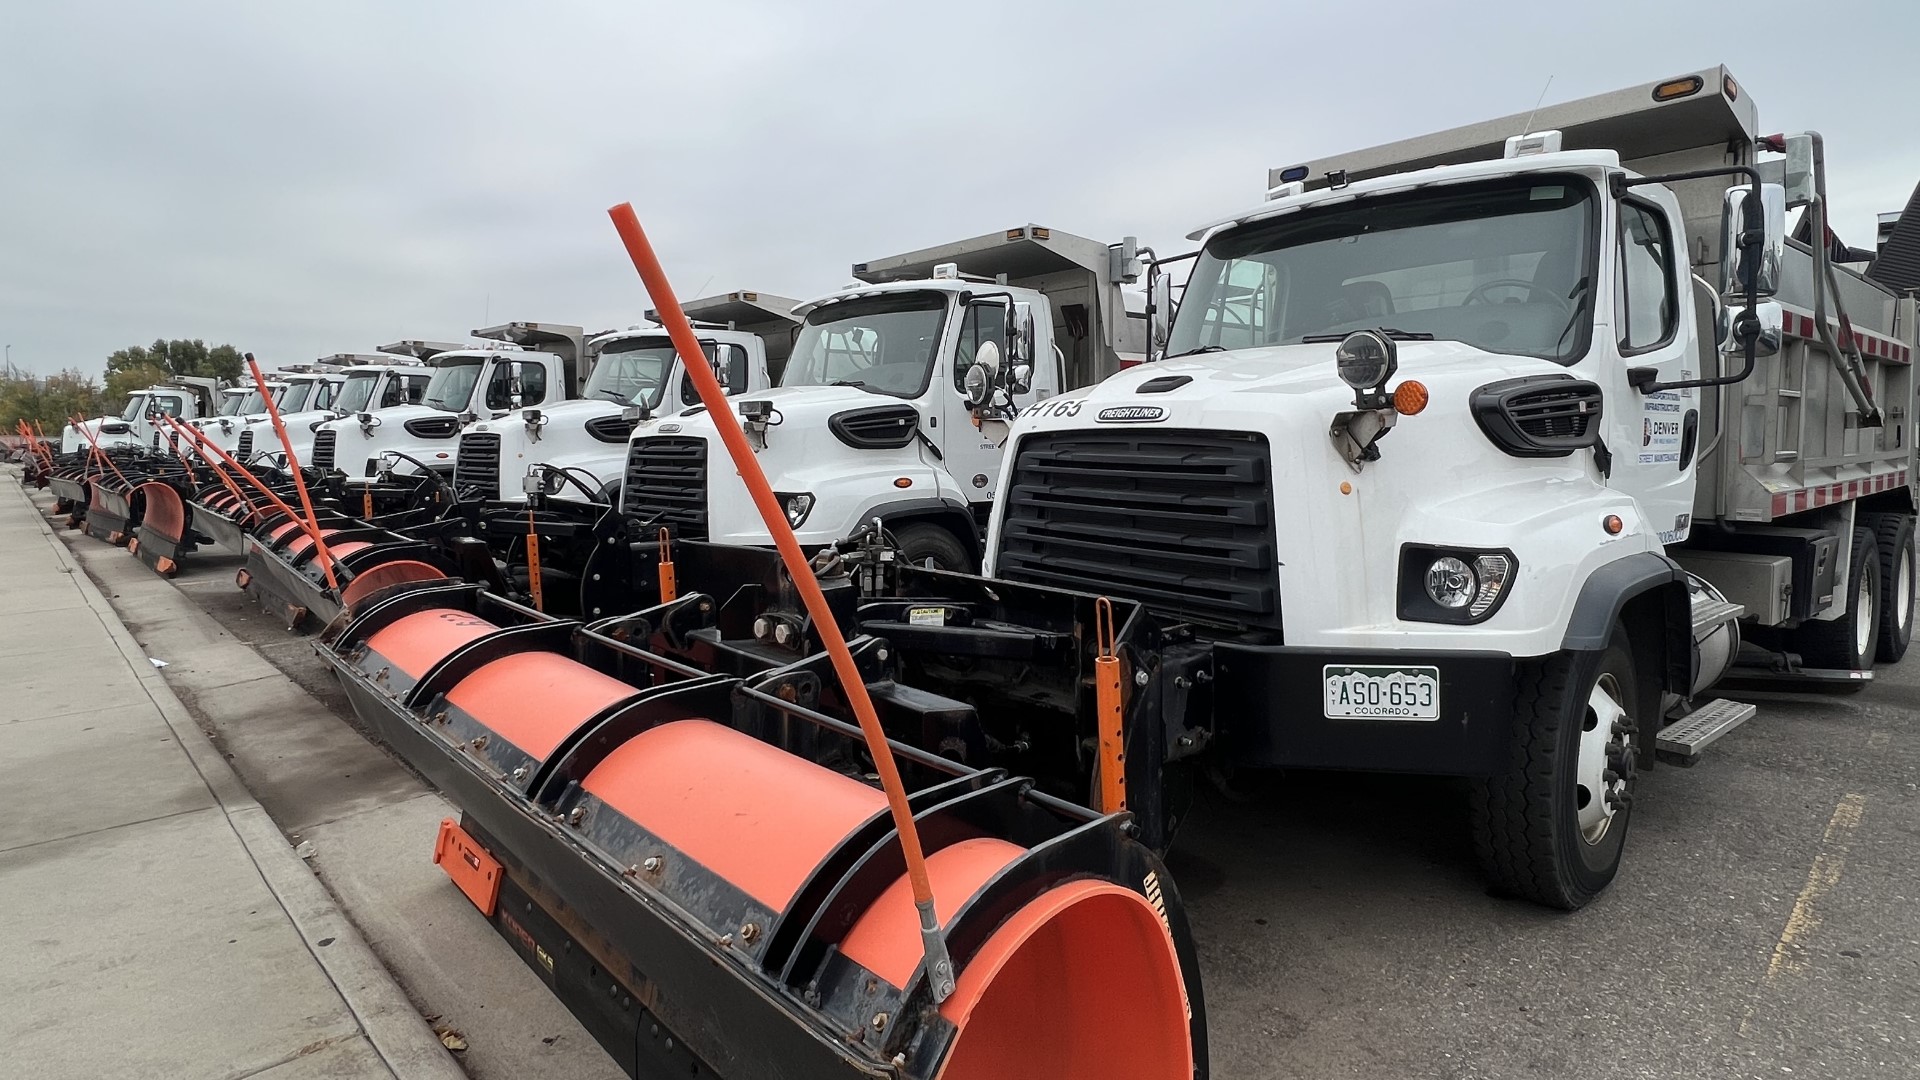 Denver's first snow storm is near— and the City is prepared, snow plows and all.